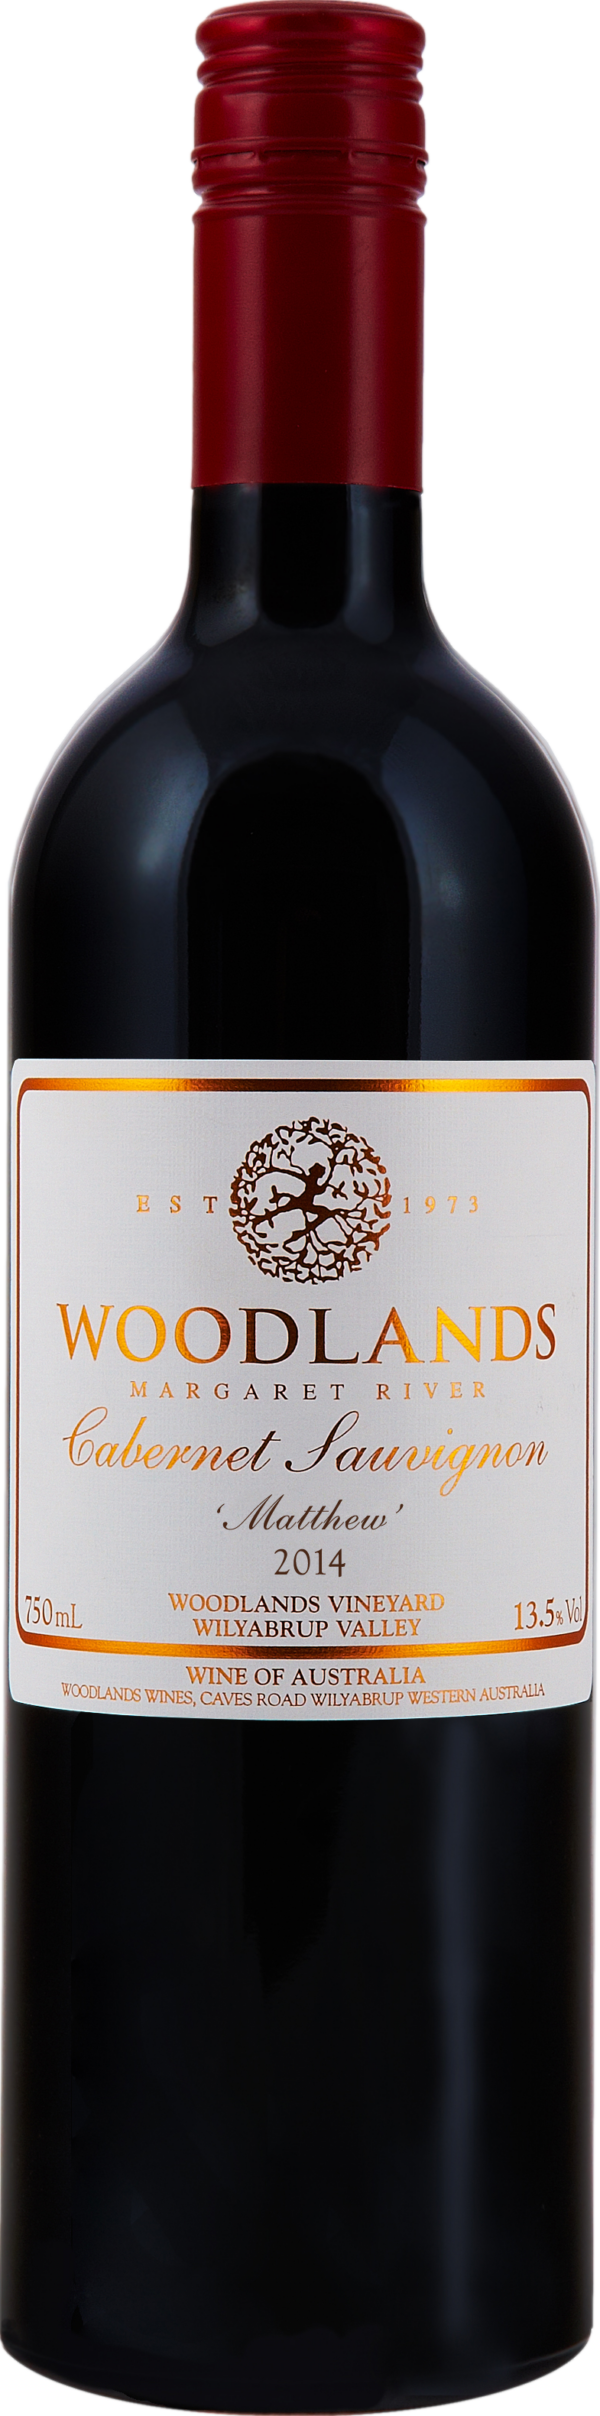 Product image of Woodlands Matthew Cabernet Sauvignon 2014 from 8wines